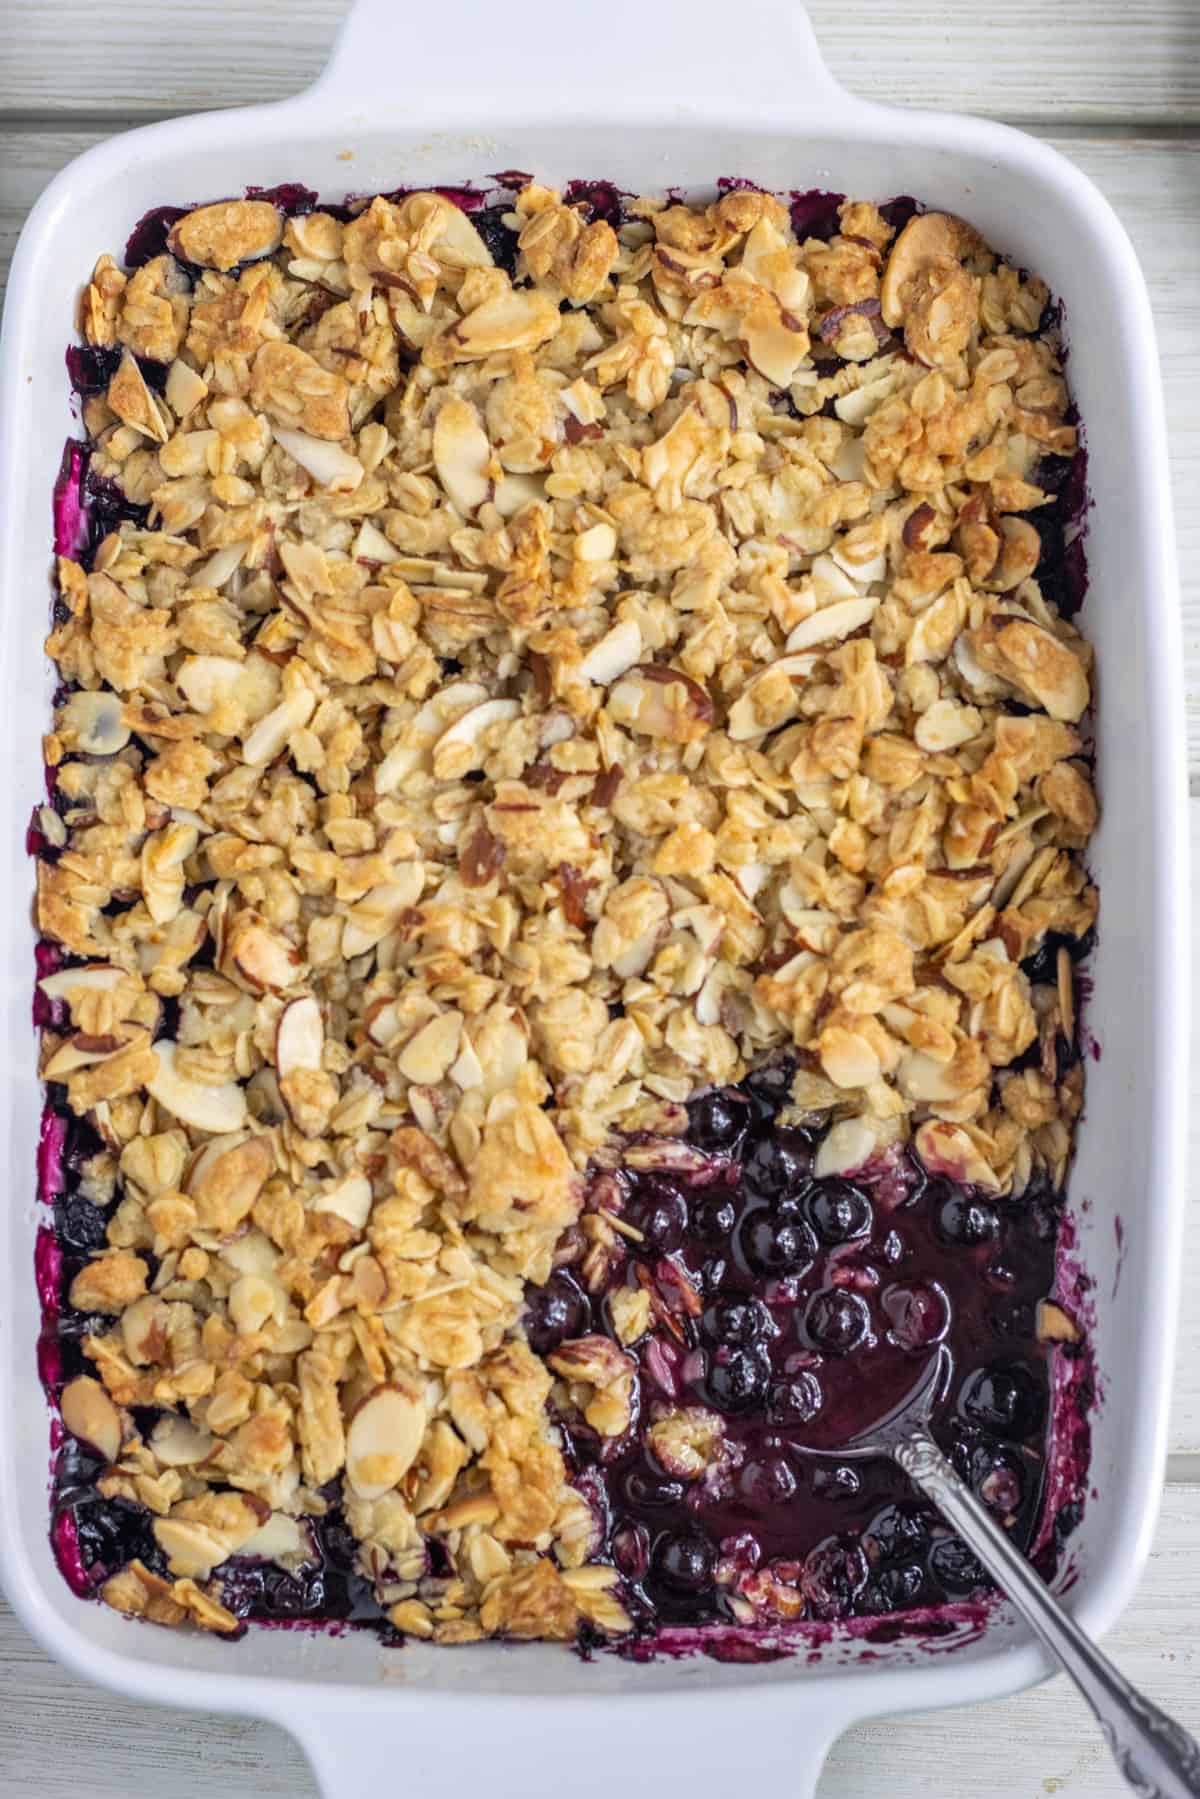 Blueberry crisp with scoop missing and a spoon.